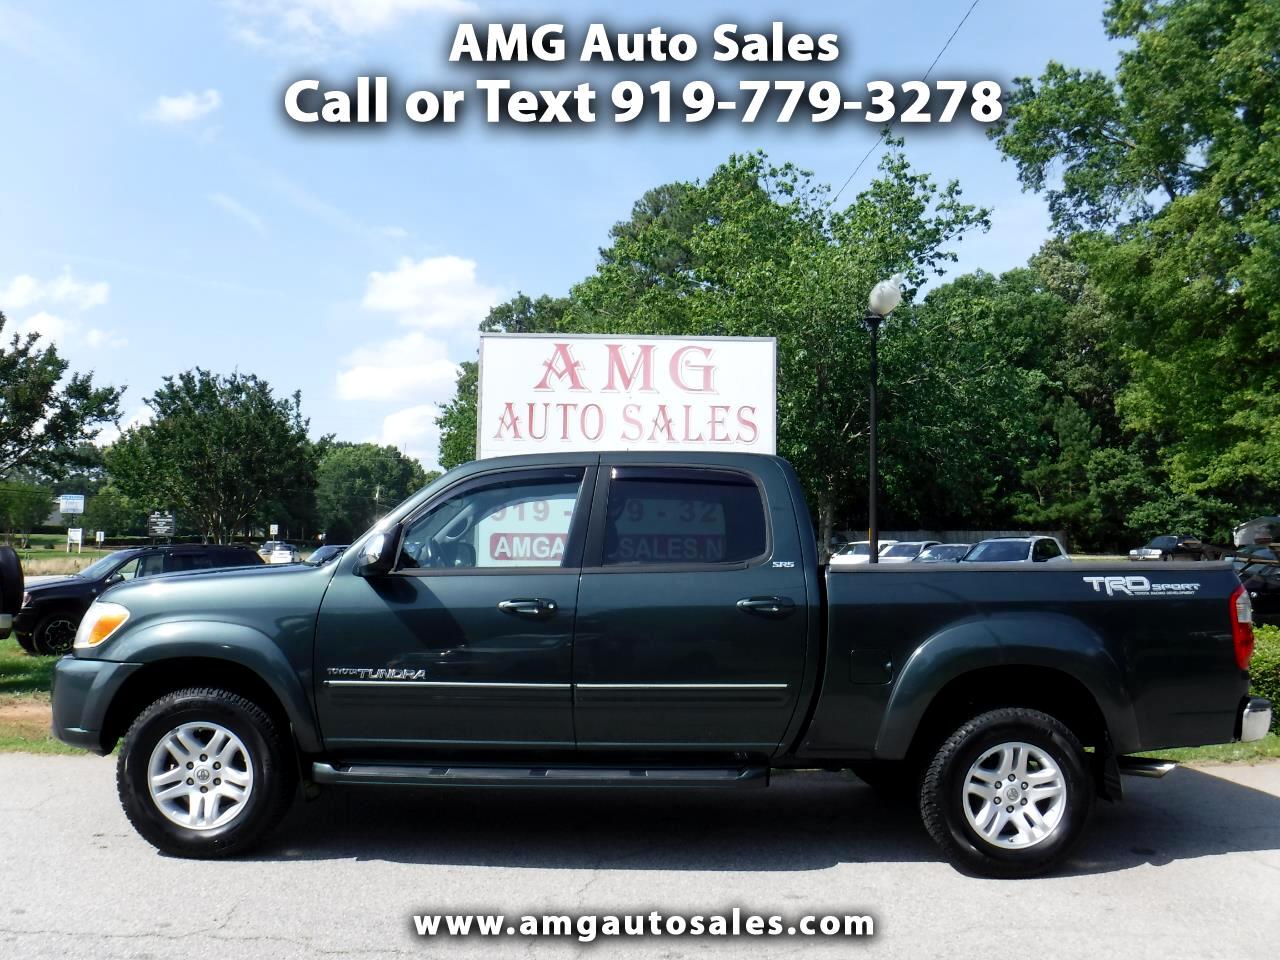 Used 2006 Toyota Tundra Trd 4wd For Sale In Raleigh Nc 27603 Amg